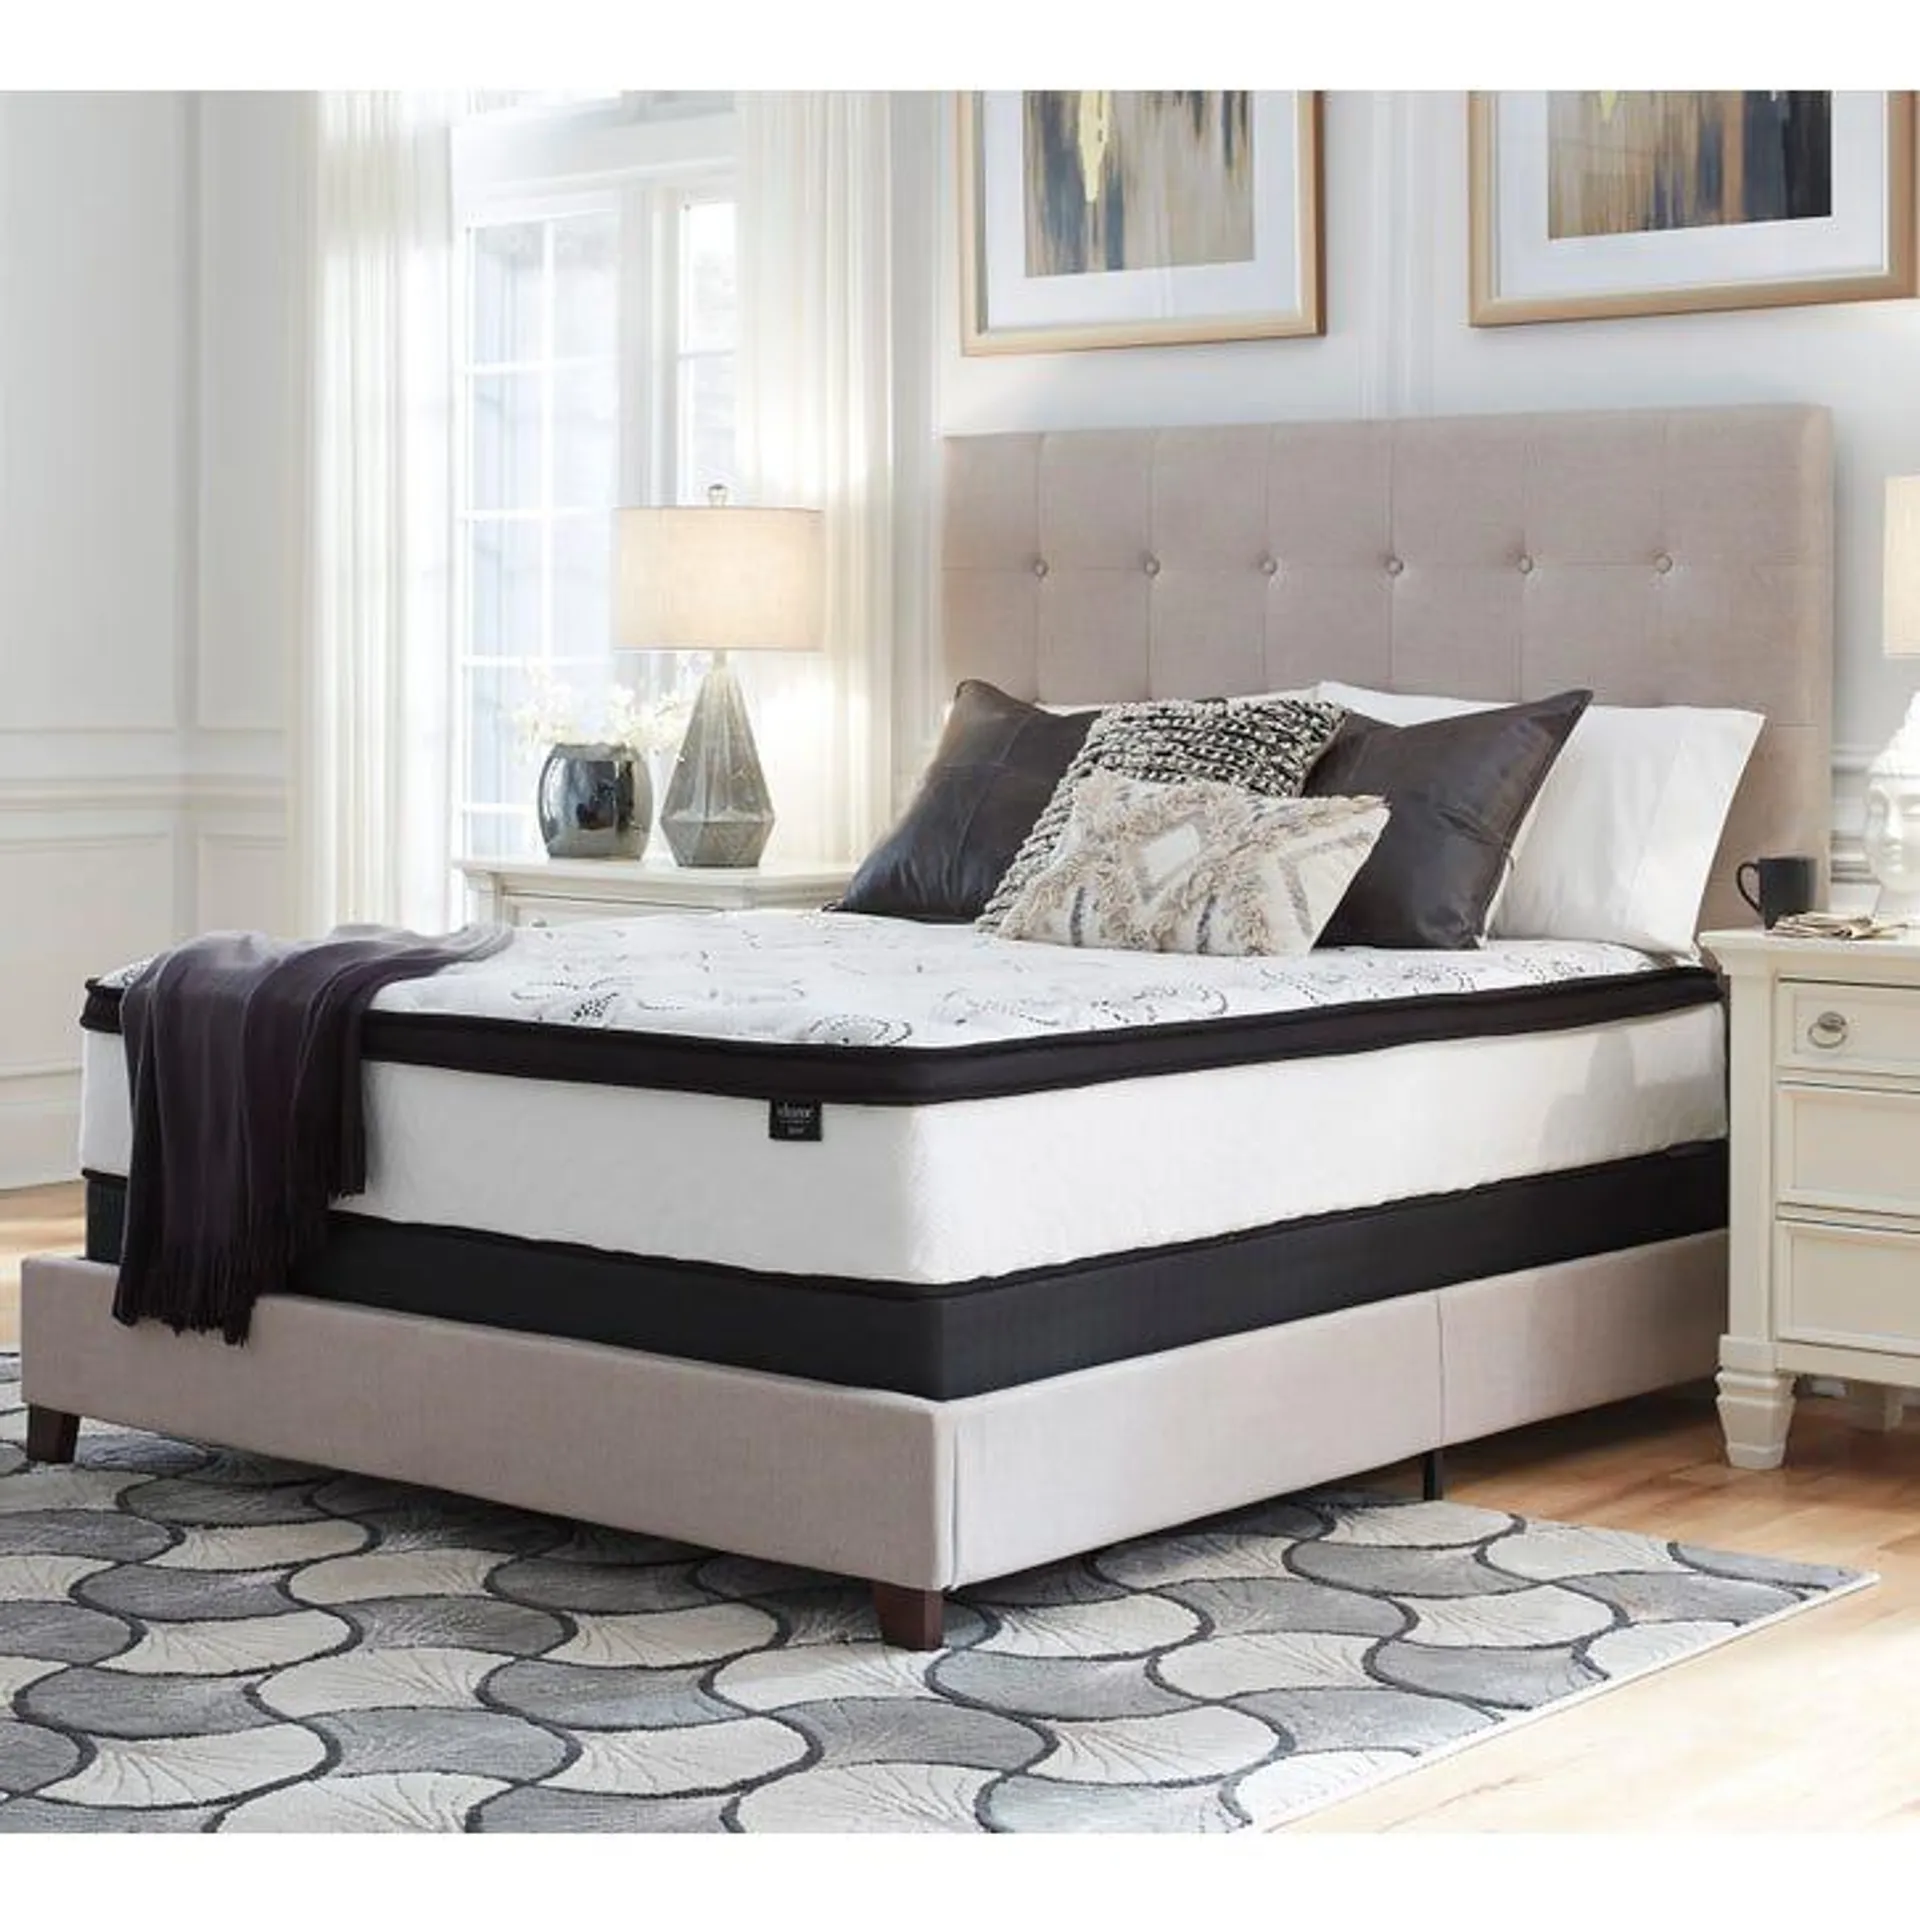 Queen Ashley Chime 12 Inch Hybrid Plush Bed in a Box Mattress